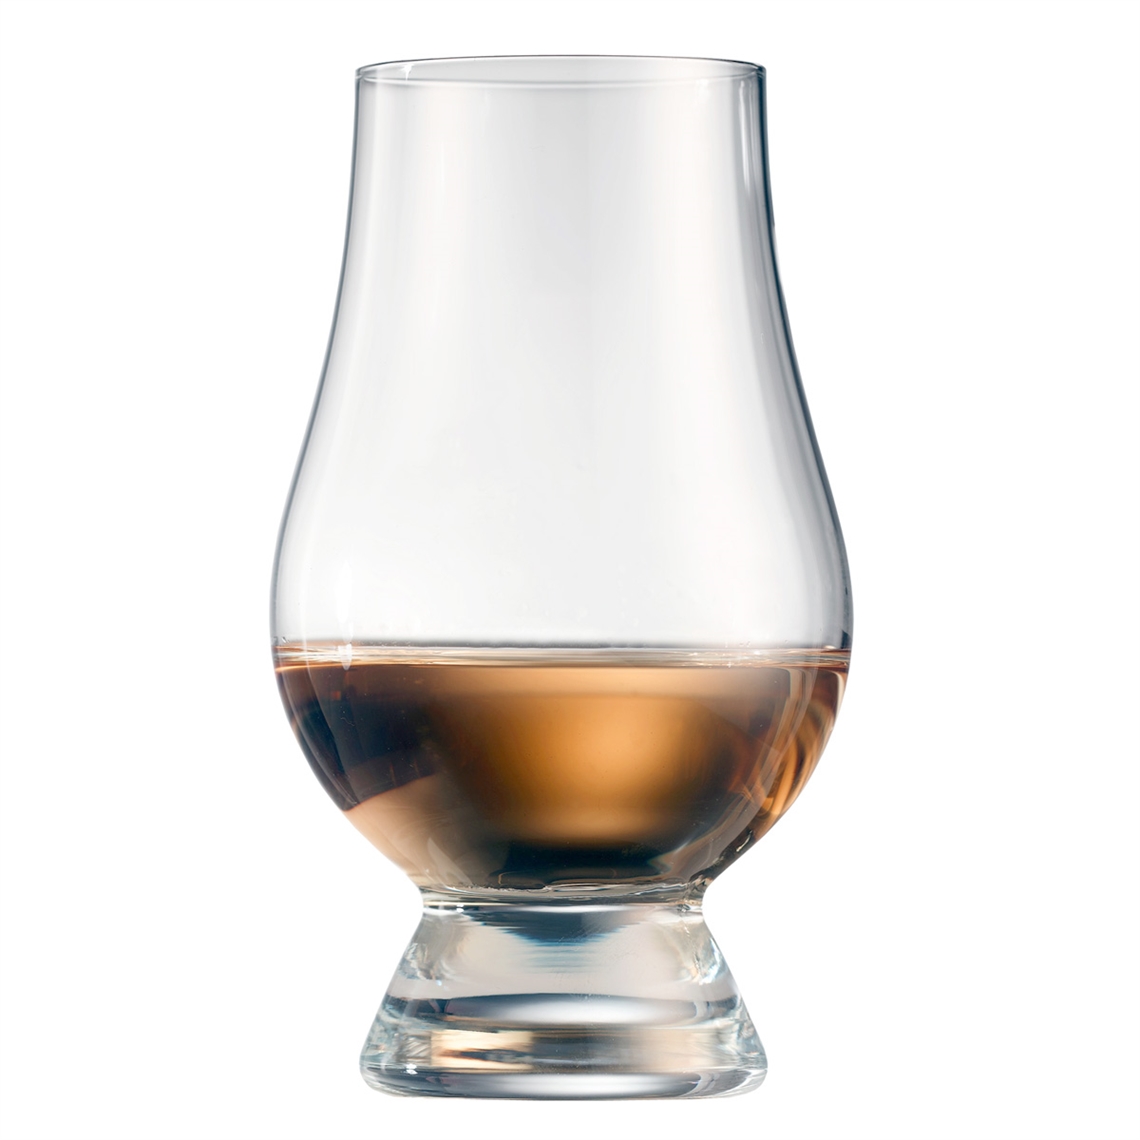 View more which riedel wine glass to choose from our Whisky Glasses range